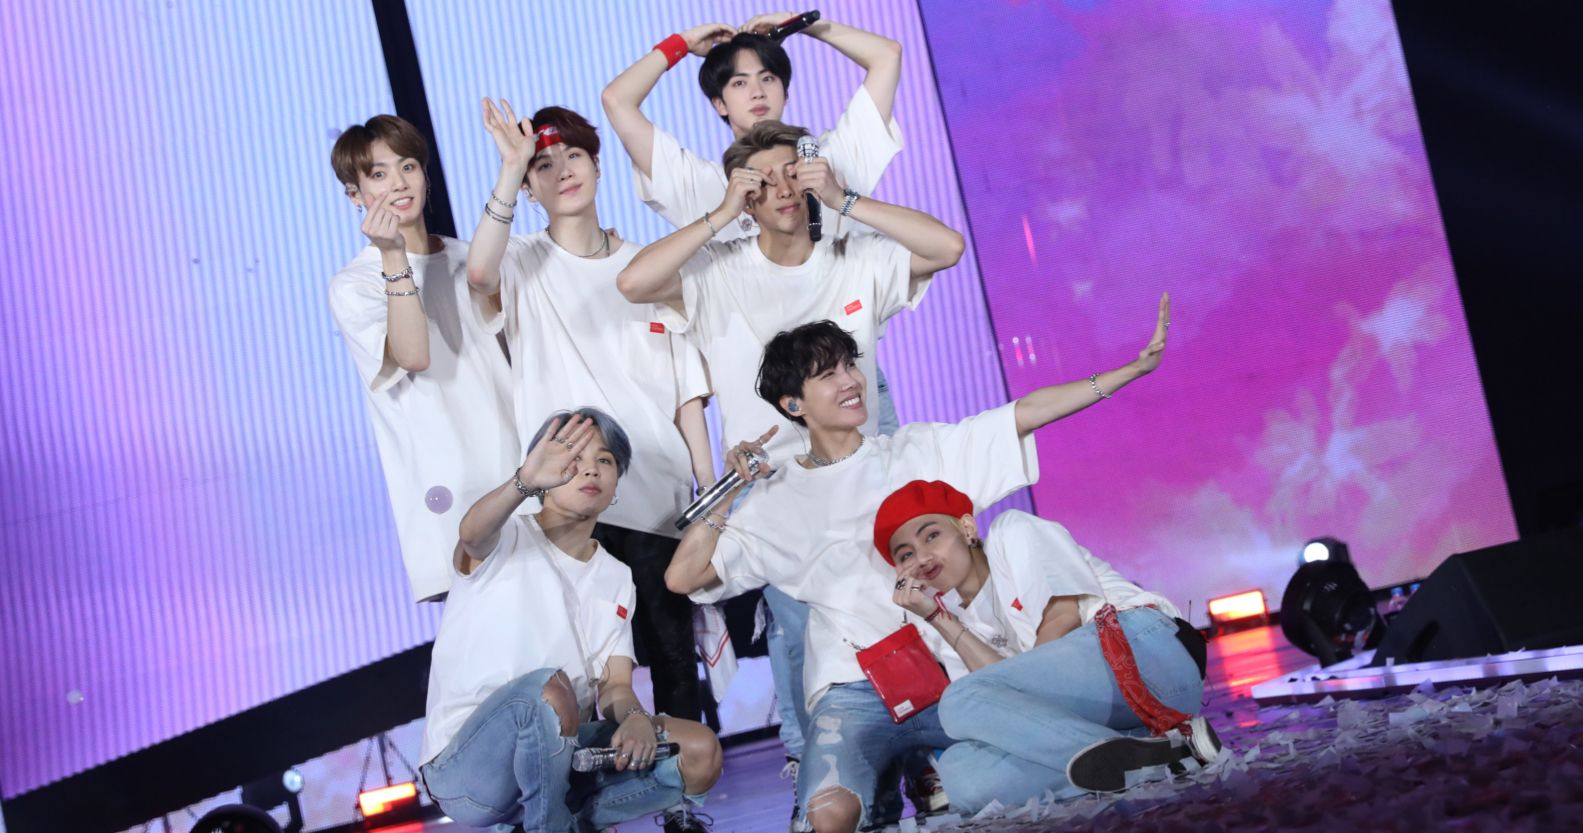 BTS Returns to Theaters This August in Bring The Soul: The Movie